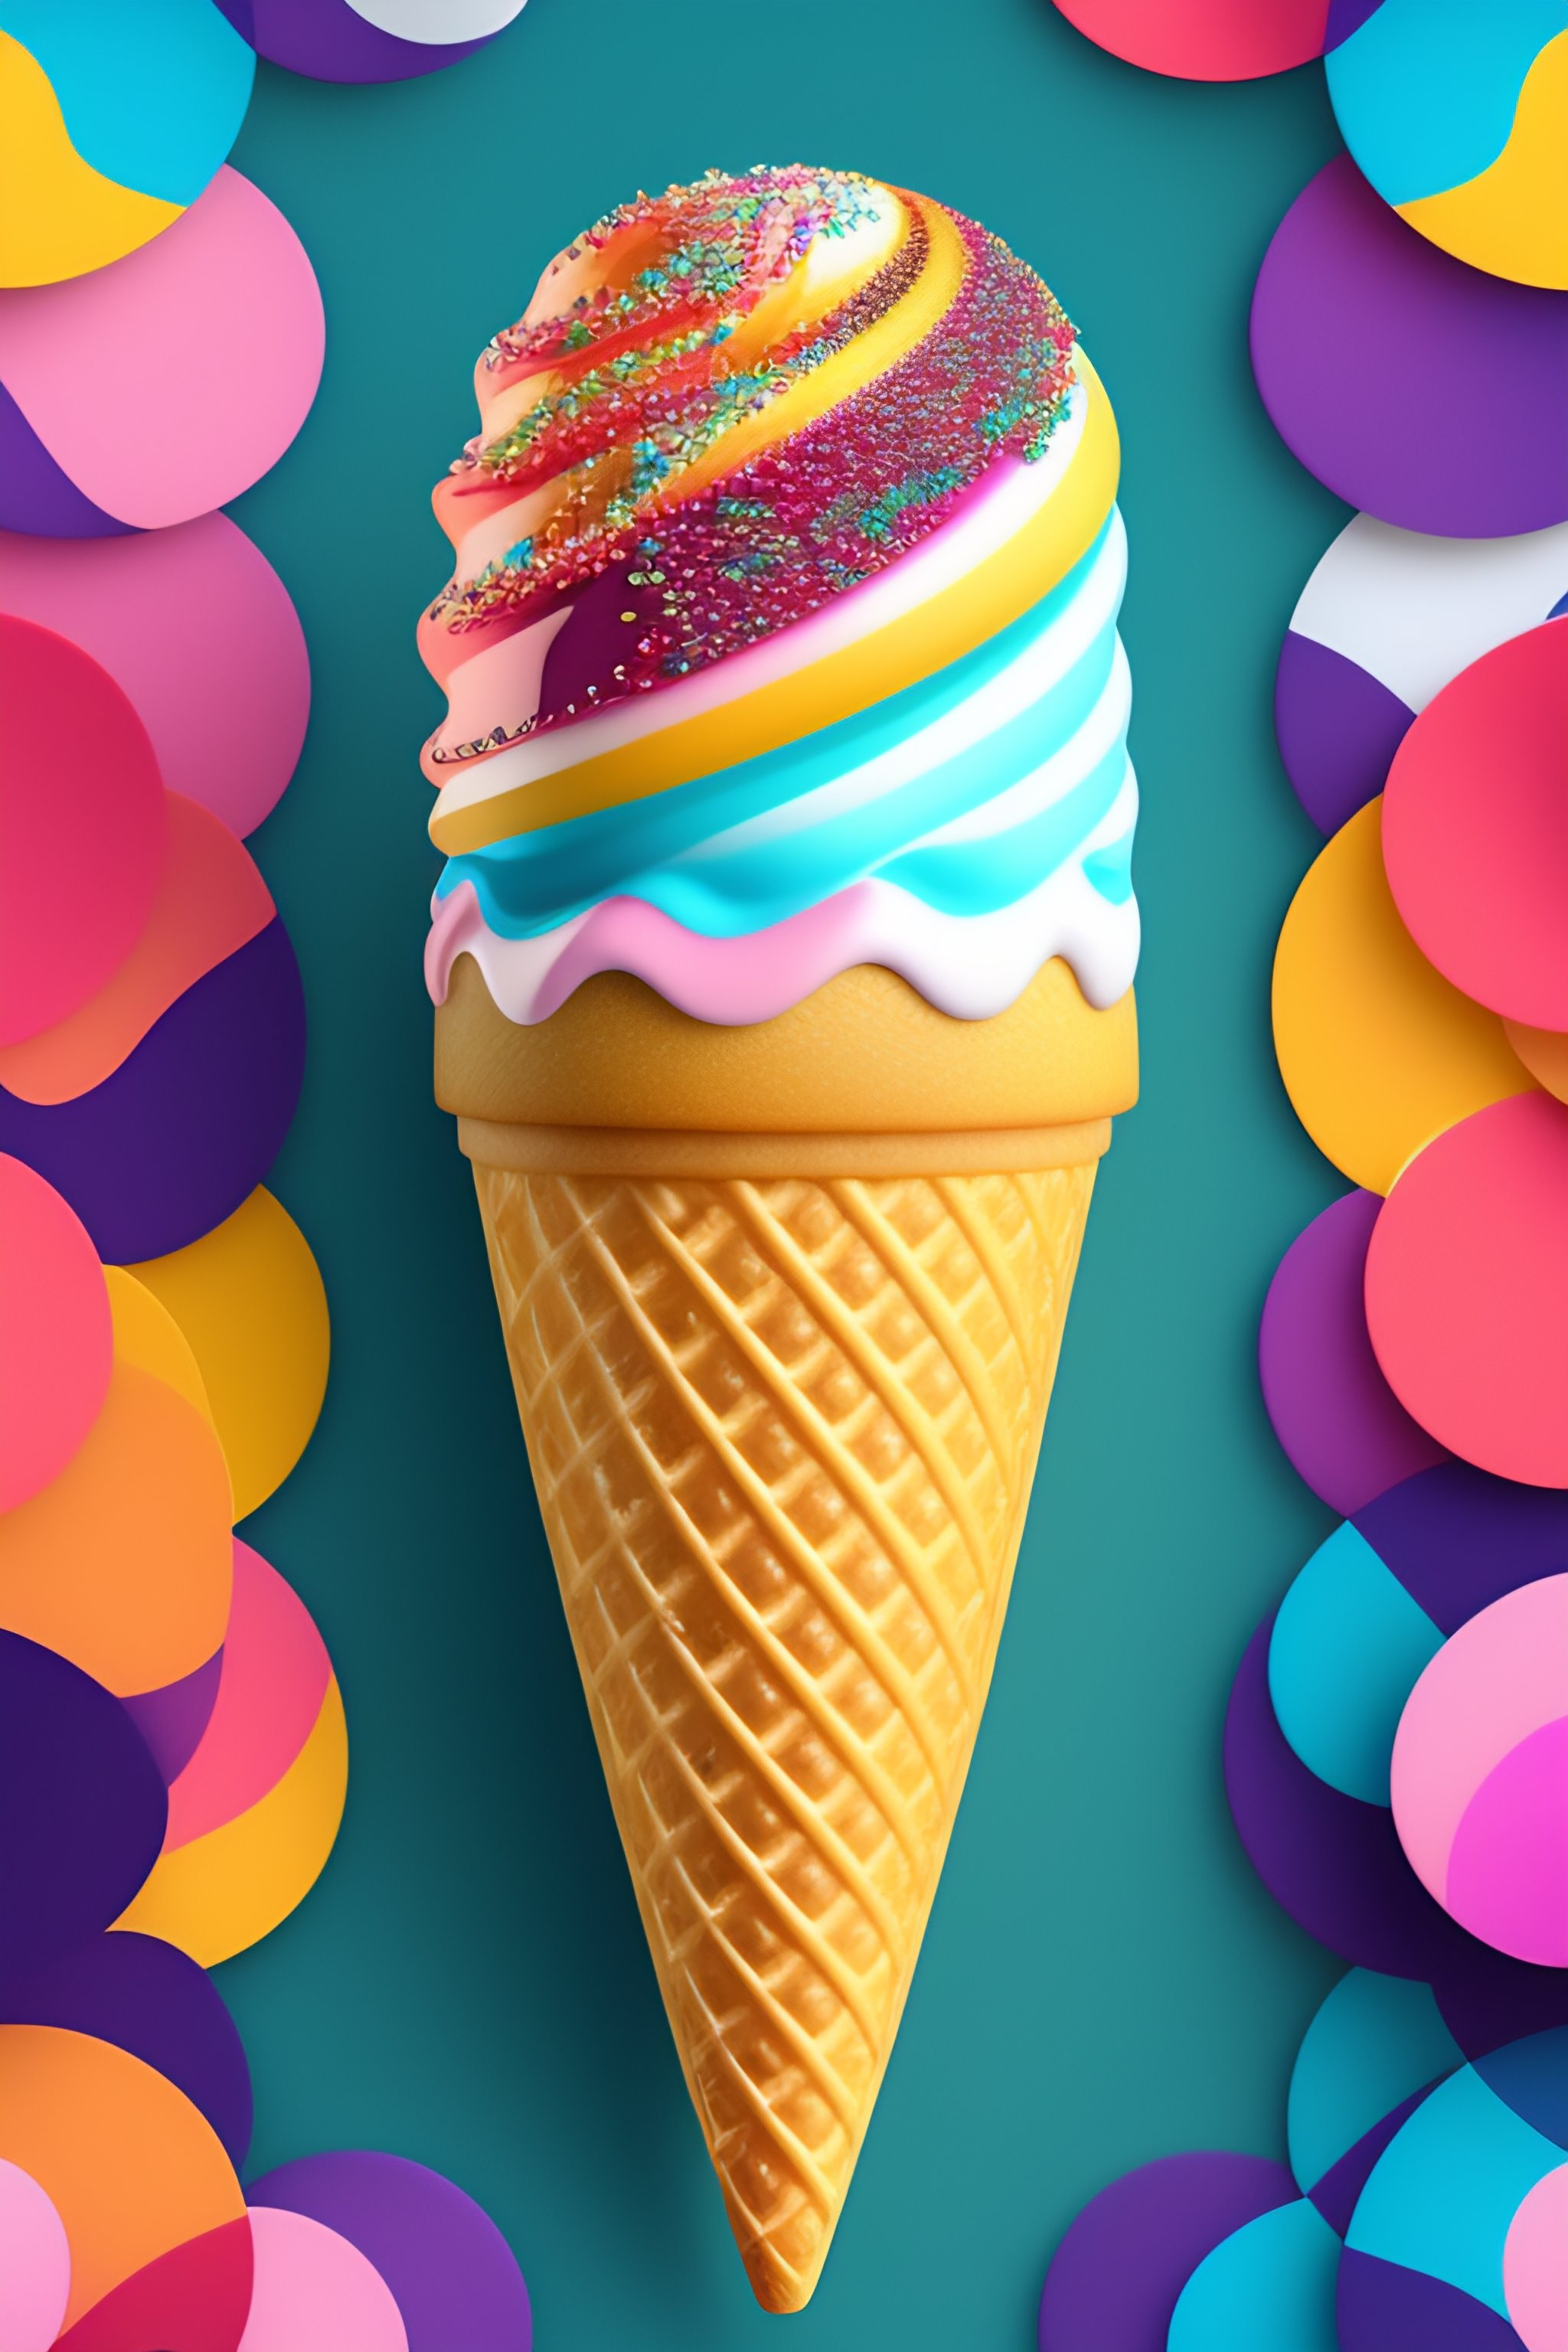 lexica-create-an-abstract-modern-pattern-of-an-ice-cream-cone-with